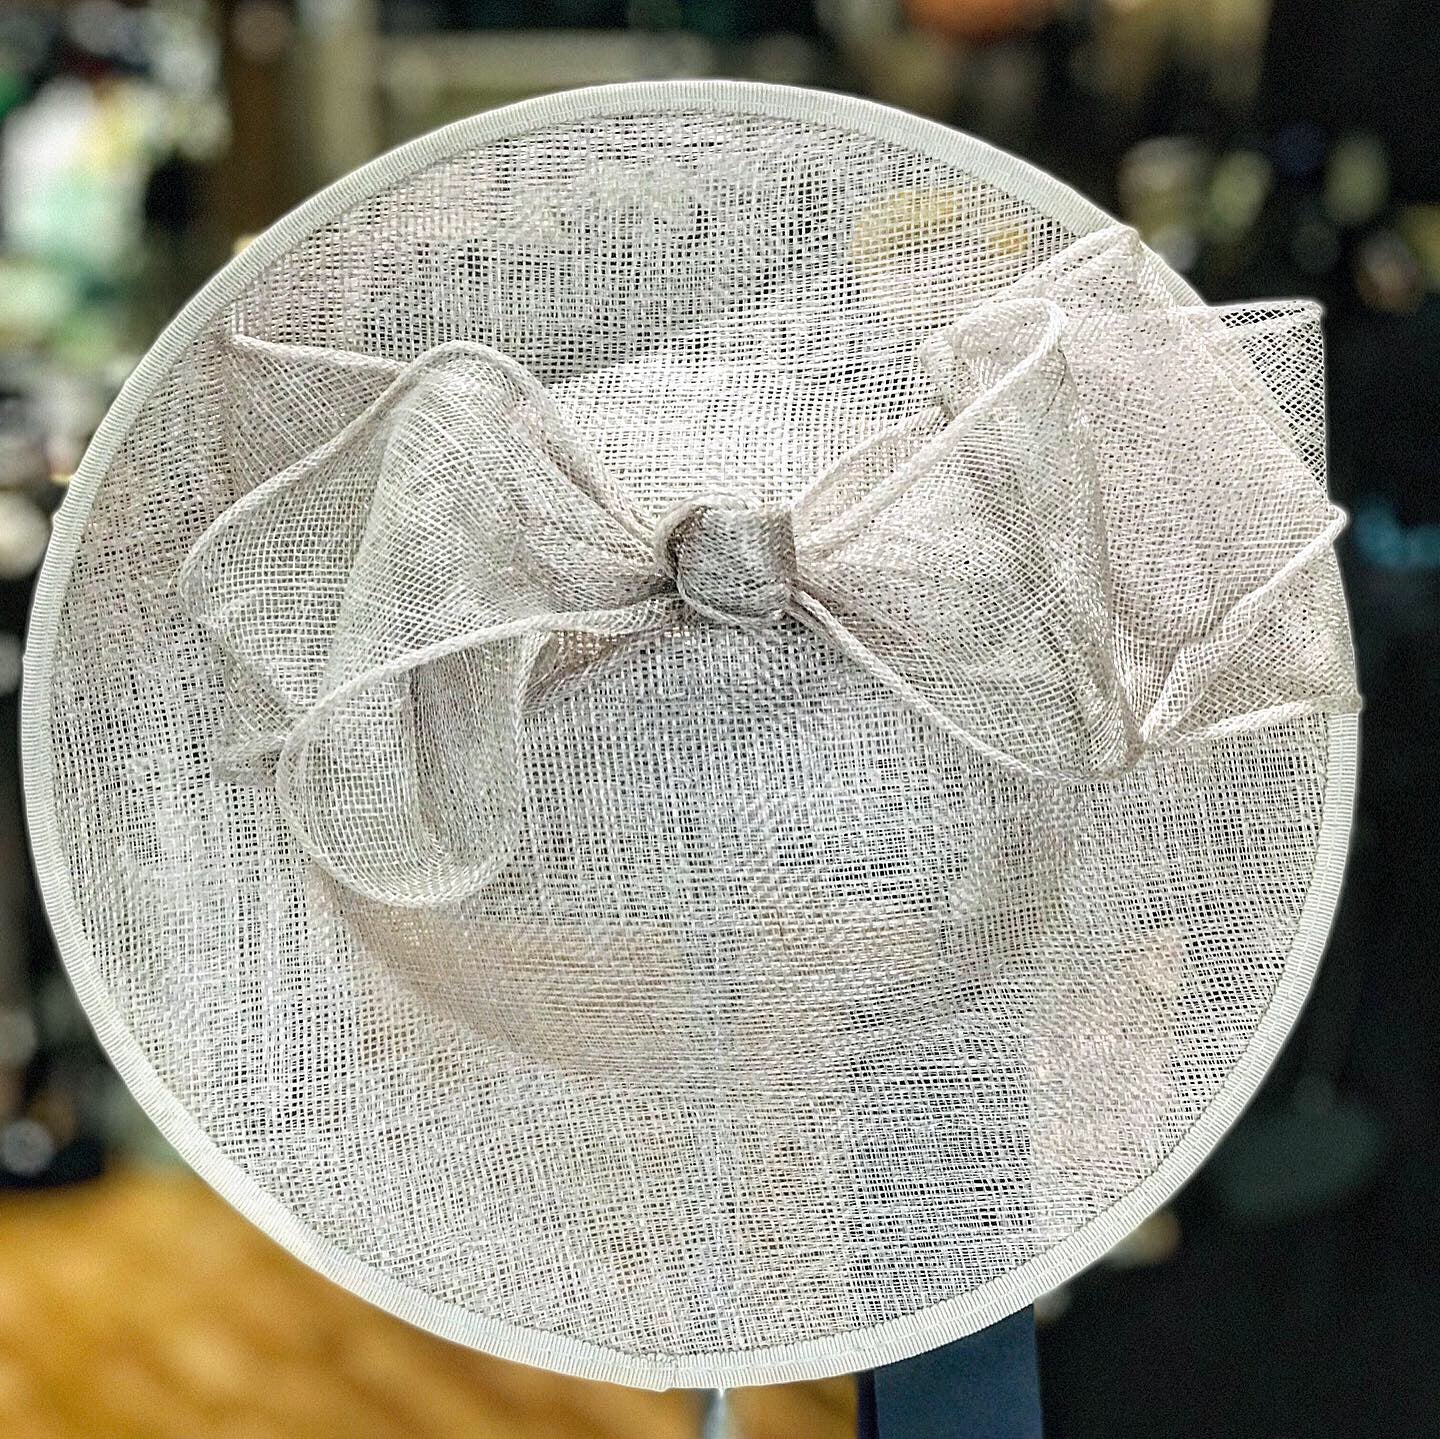 Sinamay disc fascinator with bow